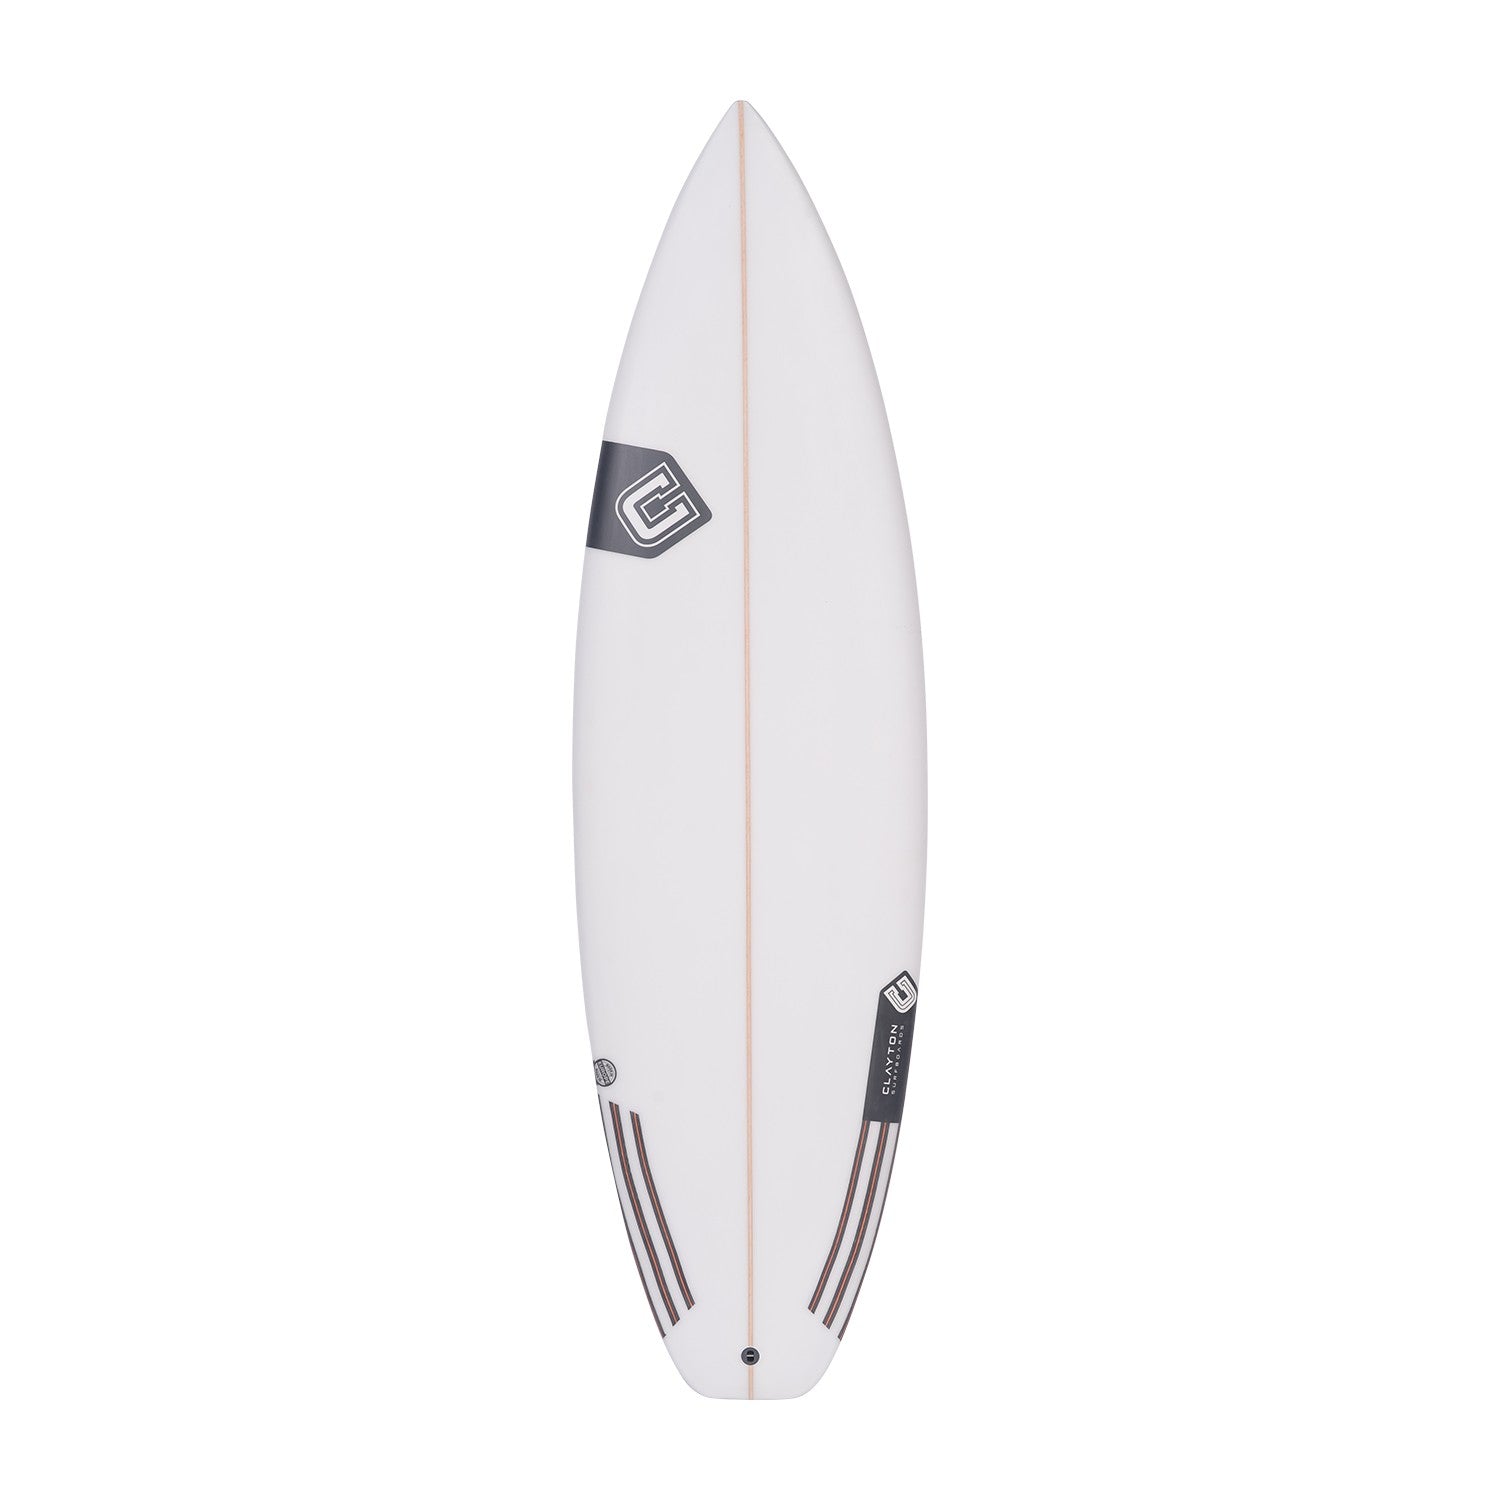 CLAYTON Surfboards - Trickster (PU) Futures - 5'11